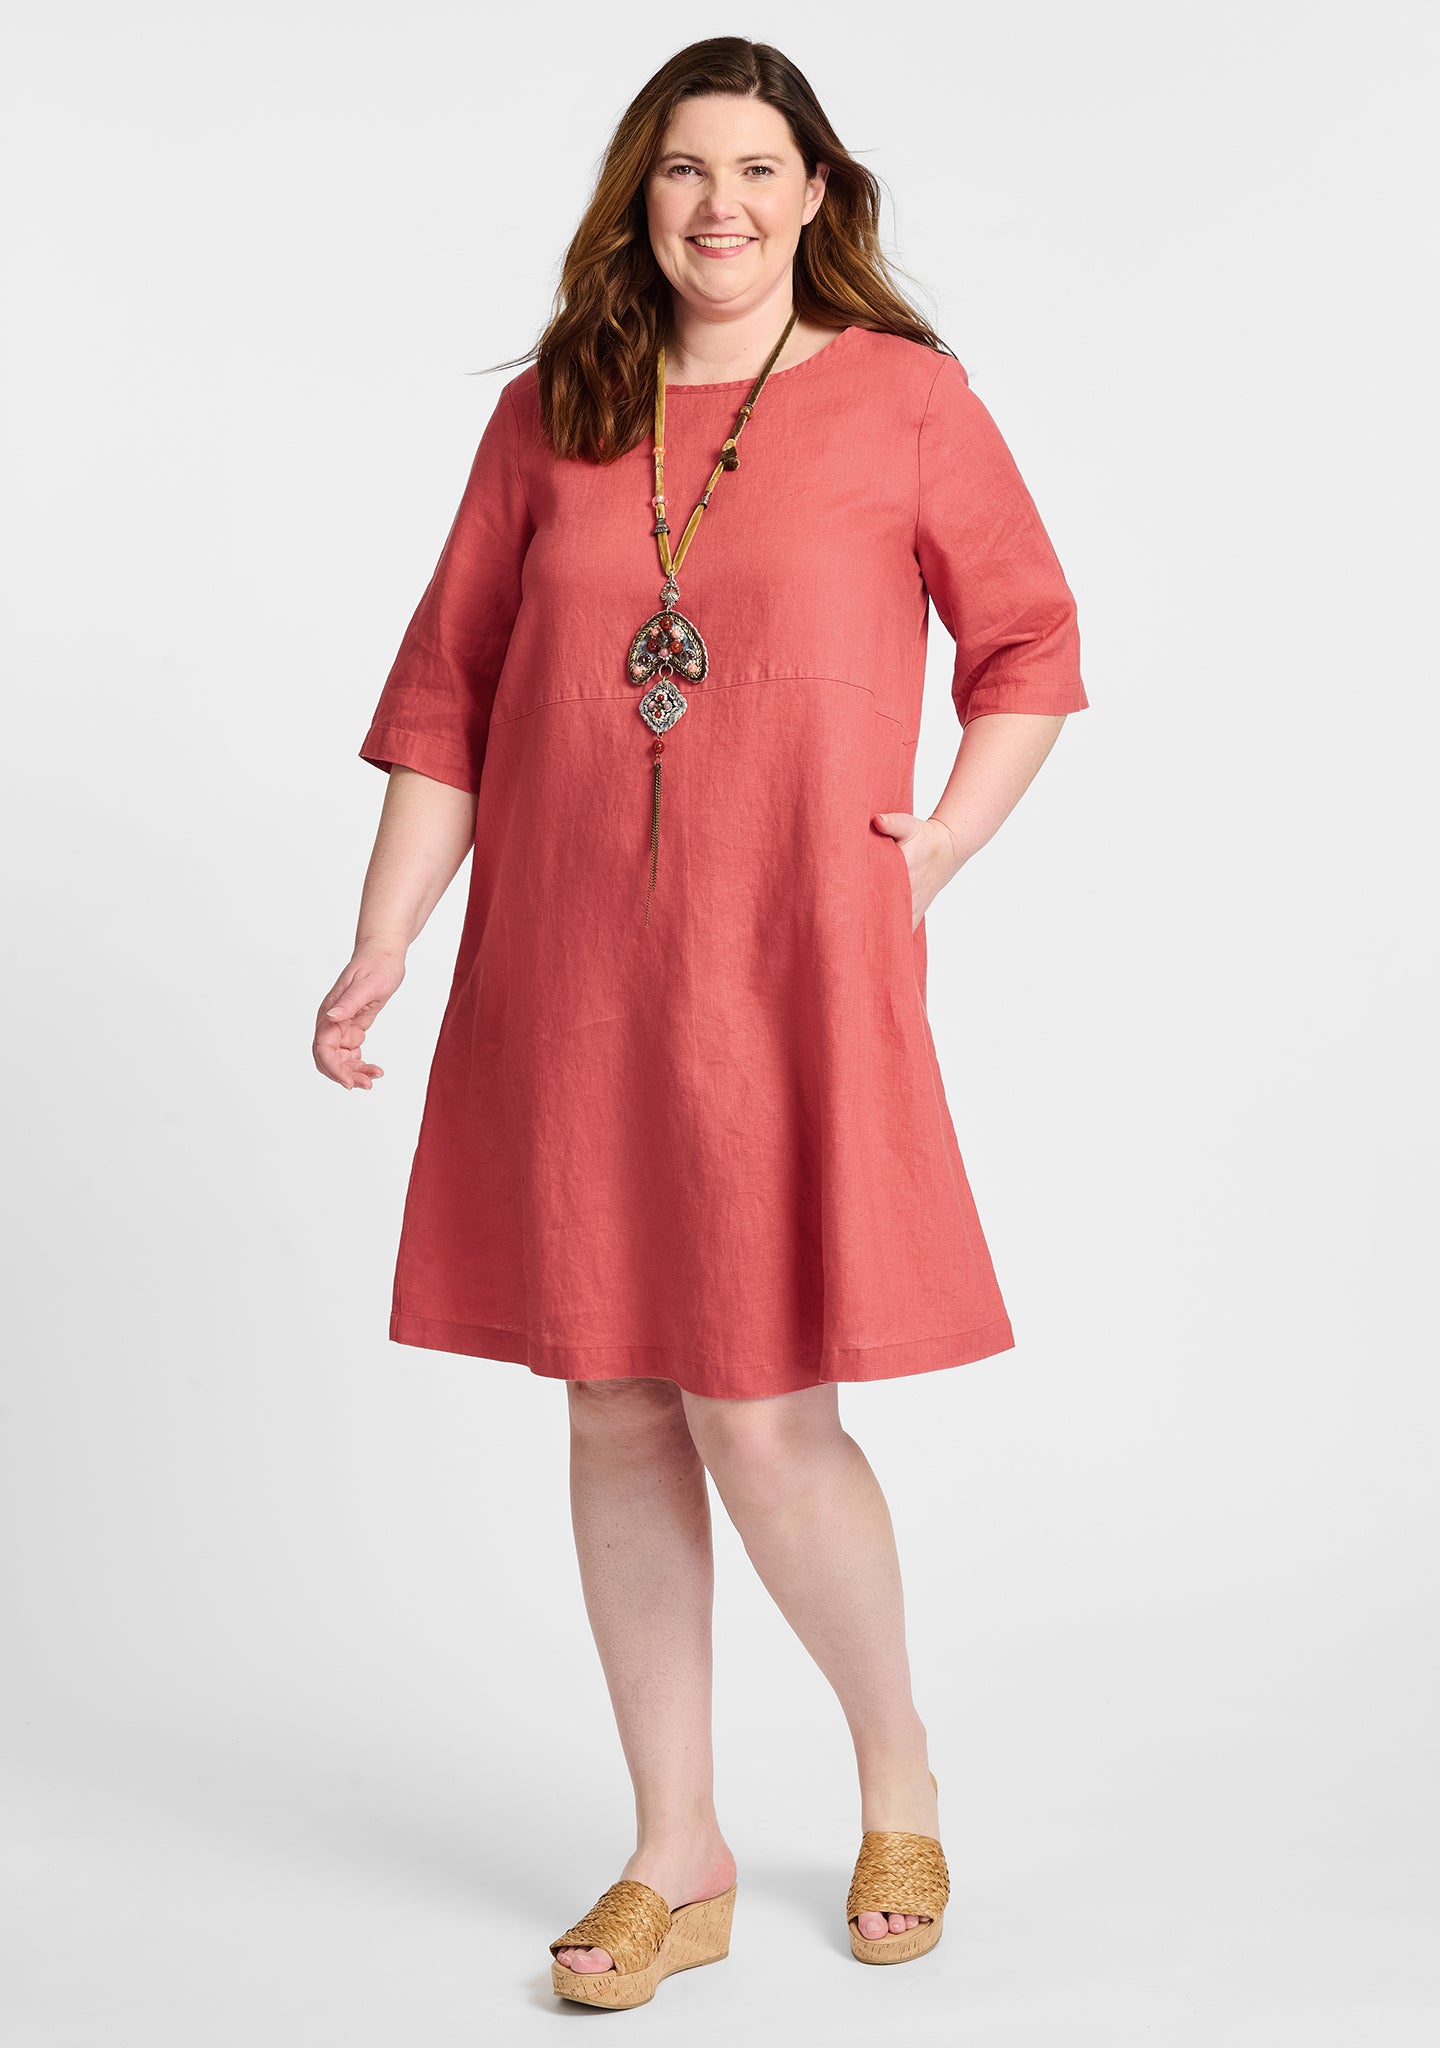 FLAX linen dress in red